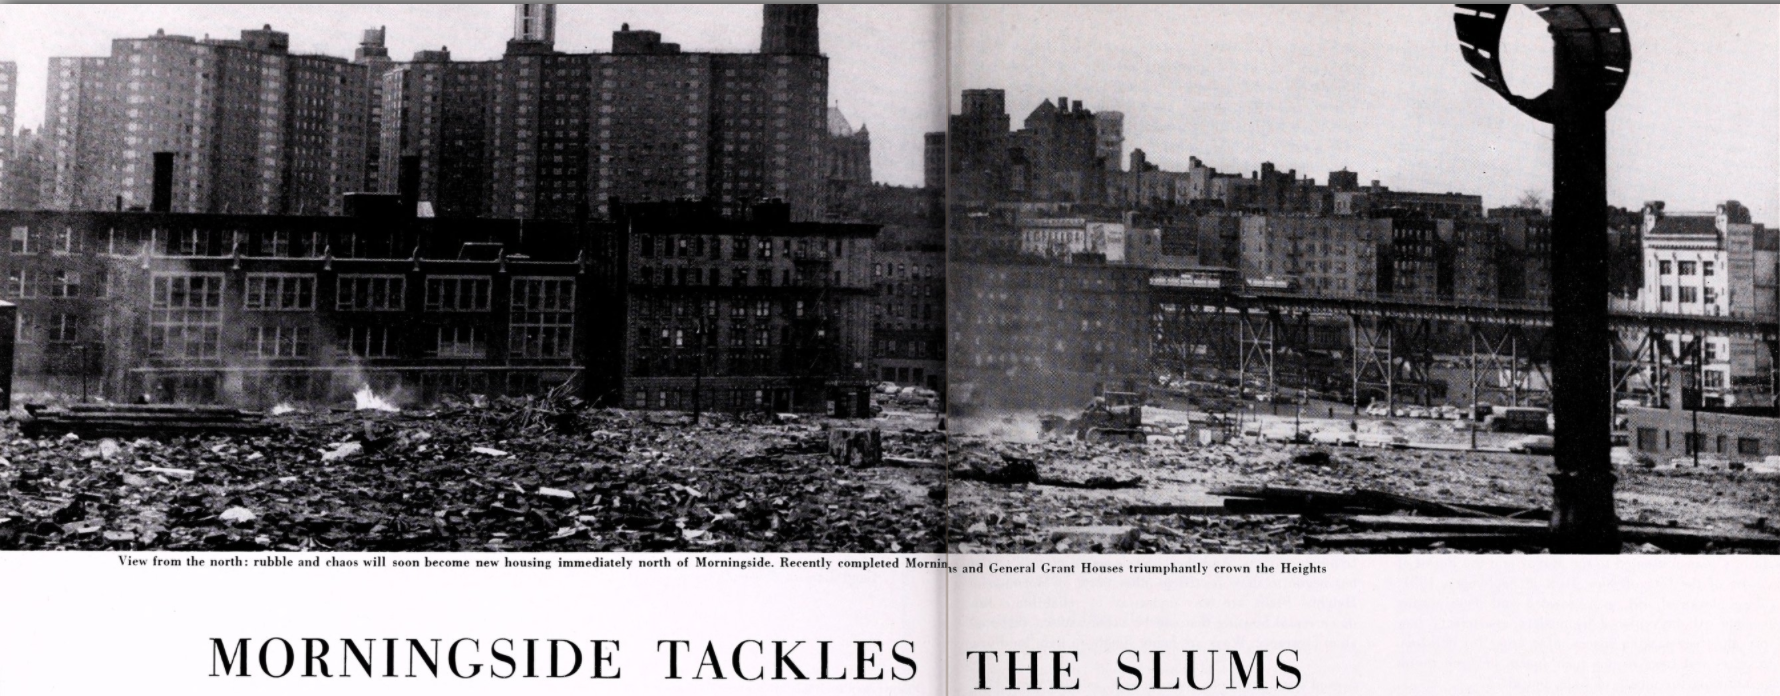 Barnard Alumnae Magazine, Februray 1958 article showing rubble and destroyed buildings in front constructed large apartment buildings. Caption reads: "View from the north: rubble and chaos will soon become new housing immediately north of Morningside. Recently completed Morningside [Gardens] and General Grant Houses triumphantly crown the Heights" and headline reads "Morningside Tackles the Slums"